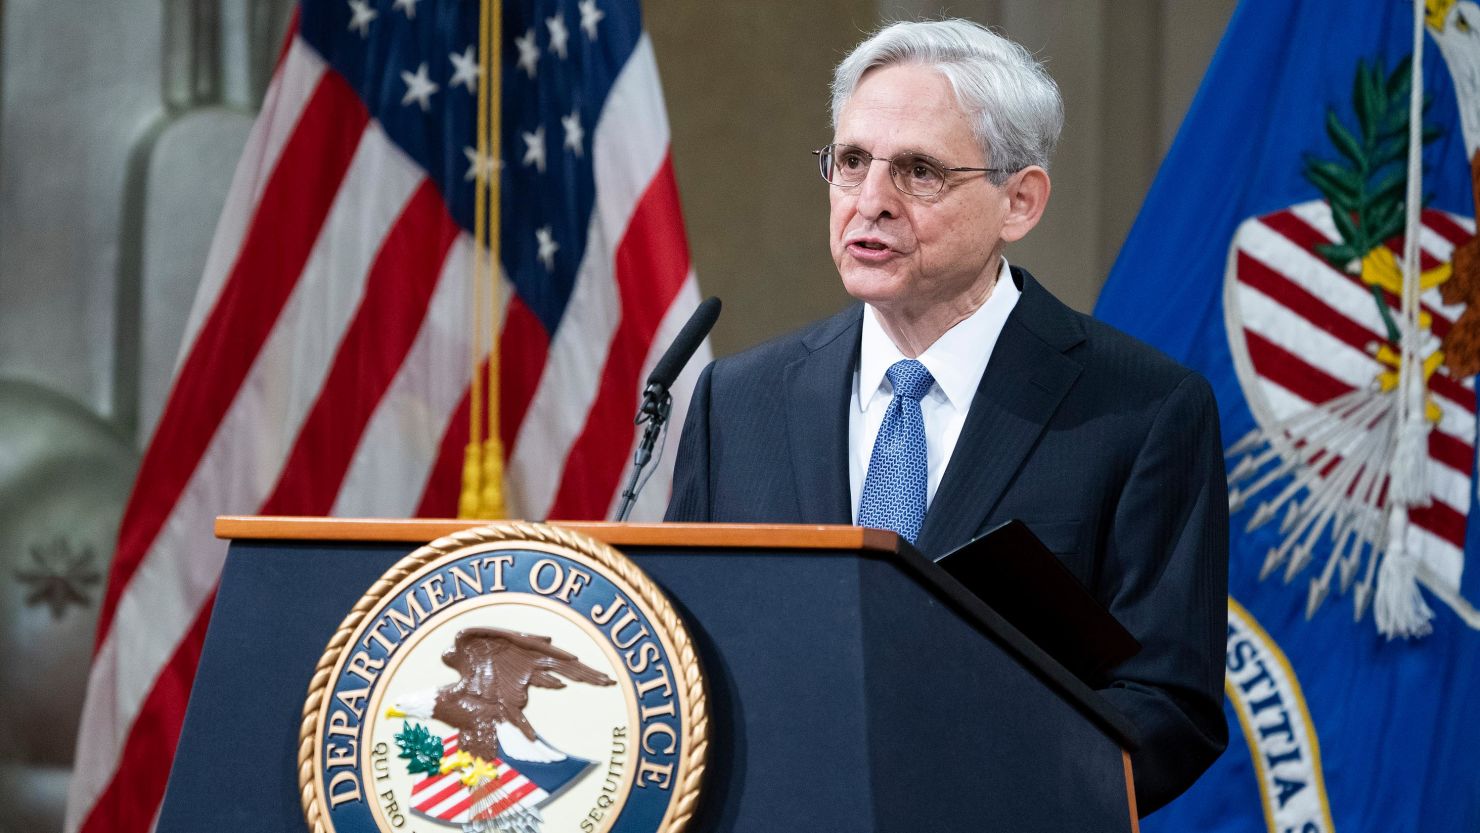 US Attorney General Merrick Garland addresses the staff on his first day at the Department of Justice March 11, 2021, in Washington, DC. Garland, a one time Supreme Court nominee under former President Barack Obama, was confirmed by a Senate of vote of 70-30. 